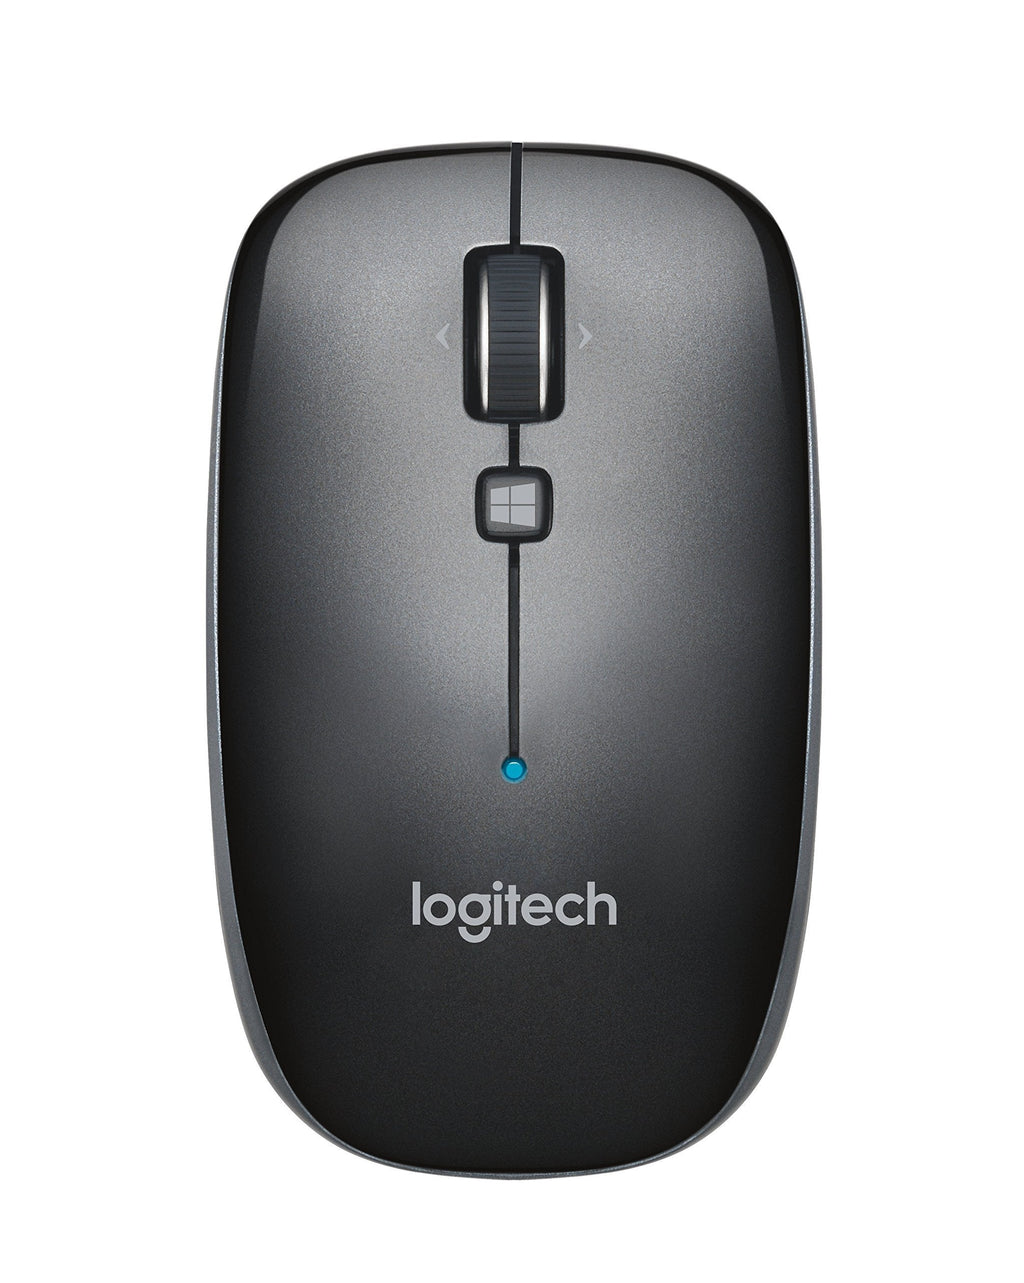  [AUSTRALIA] - Logitech M557 Bluetooth Mouse – Wireless Mouse with 1 Year Battery Life, Side-to-Side Scrolling, and Right or Left Hand Use with Apple Mac or Microsoft Windows Computers and Laptops, Gray Standard Packaging